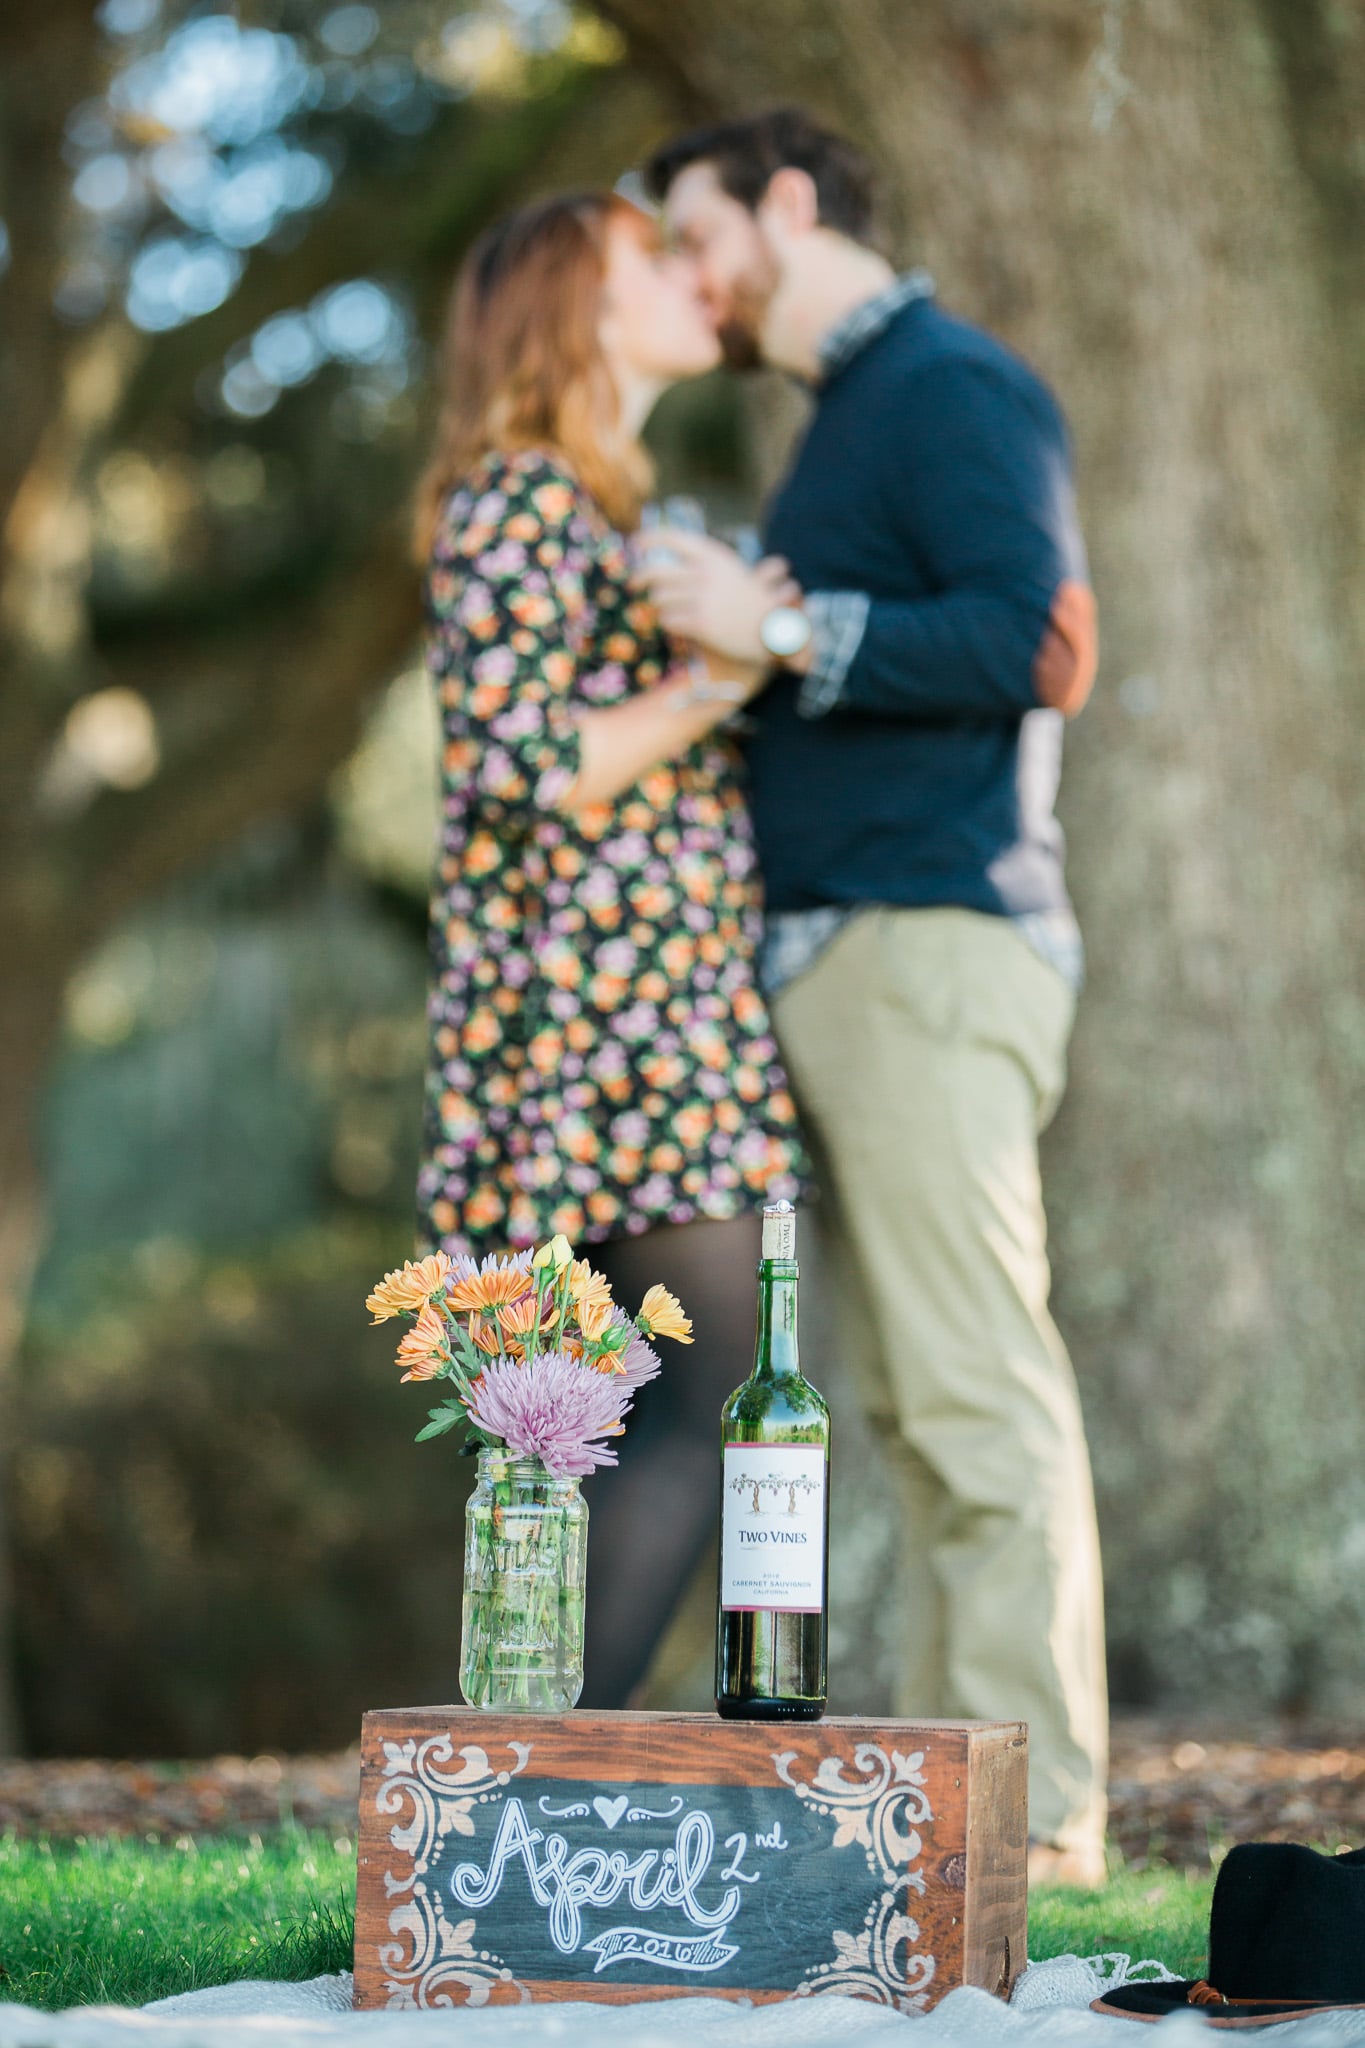 Brian and Kelsey out of focus in the background kissing with the wedding notice bouquet and wine in the foreground crystal clear, Caledonia Golf and Fish Club, Myrtle Beach Engagement Session 9, www.onelifephoto.net